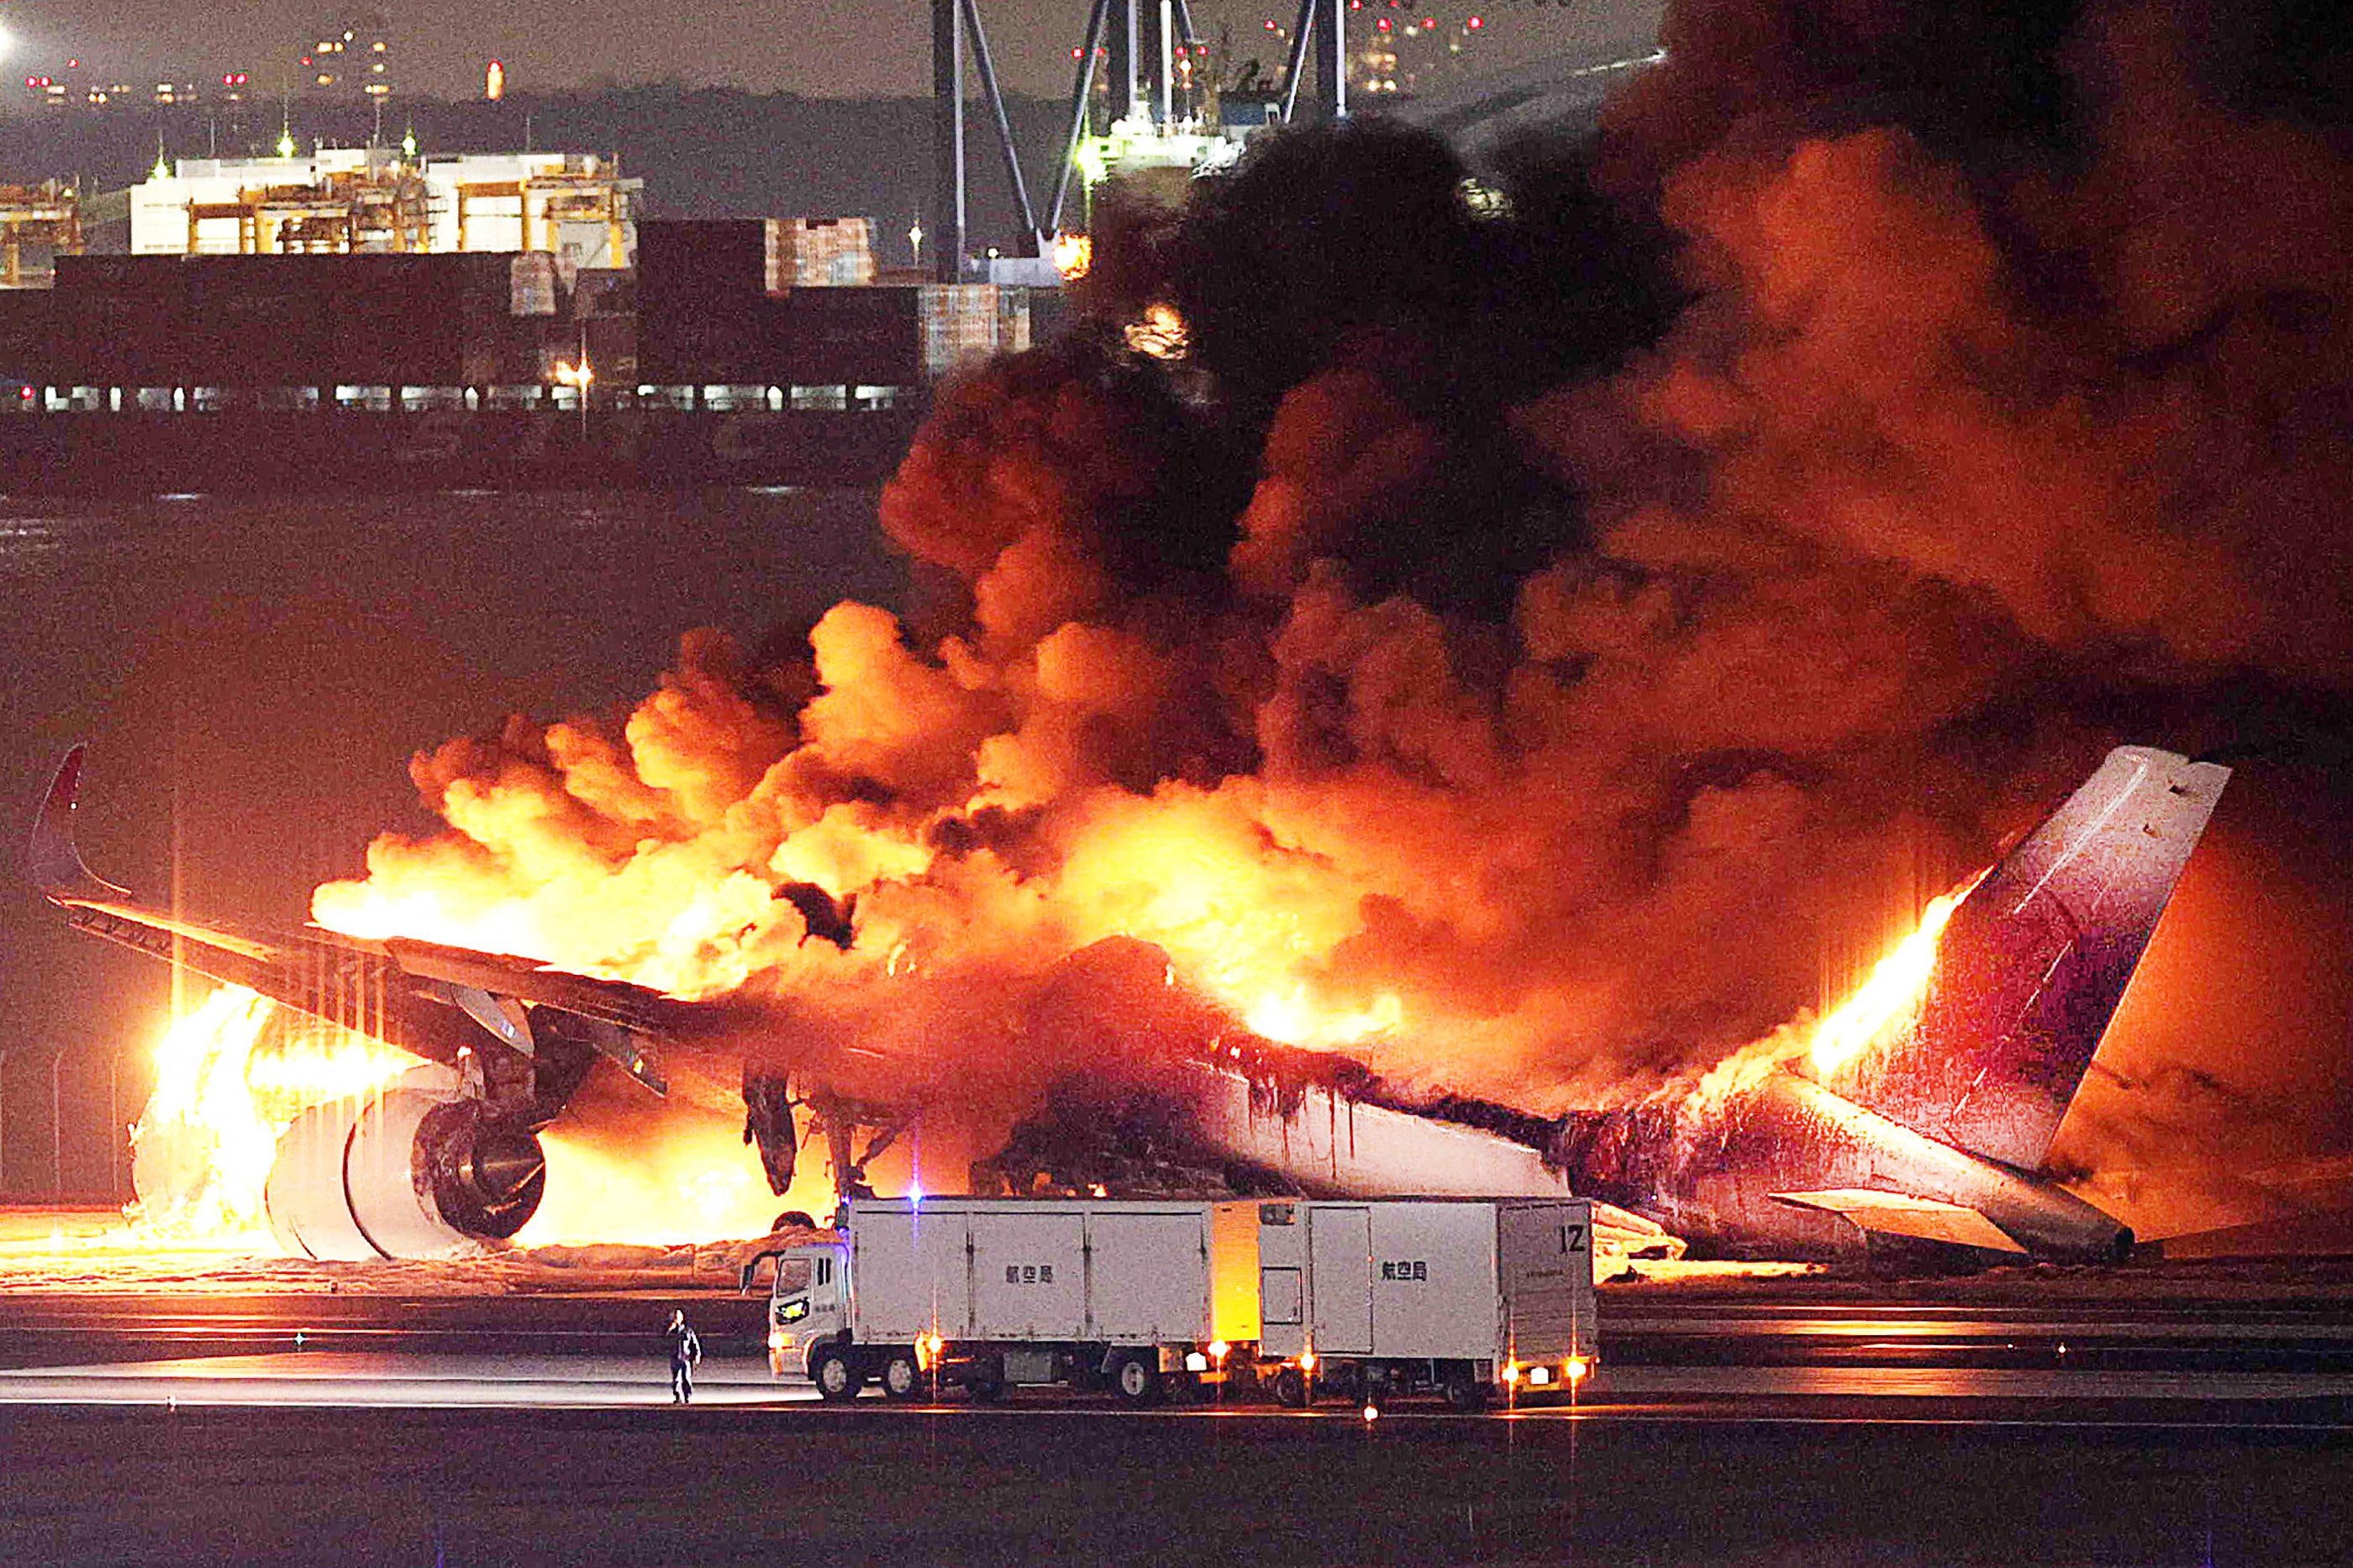 Scenes from the Japan airport crash